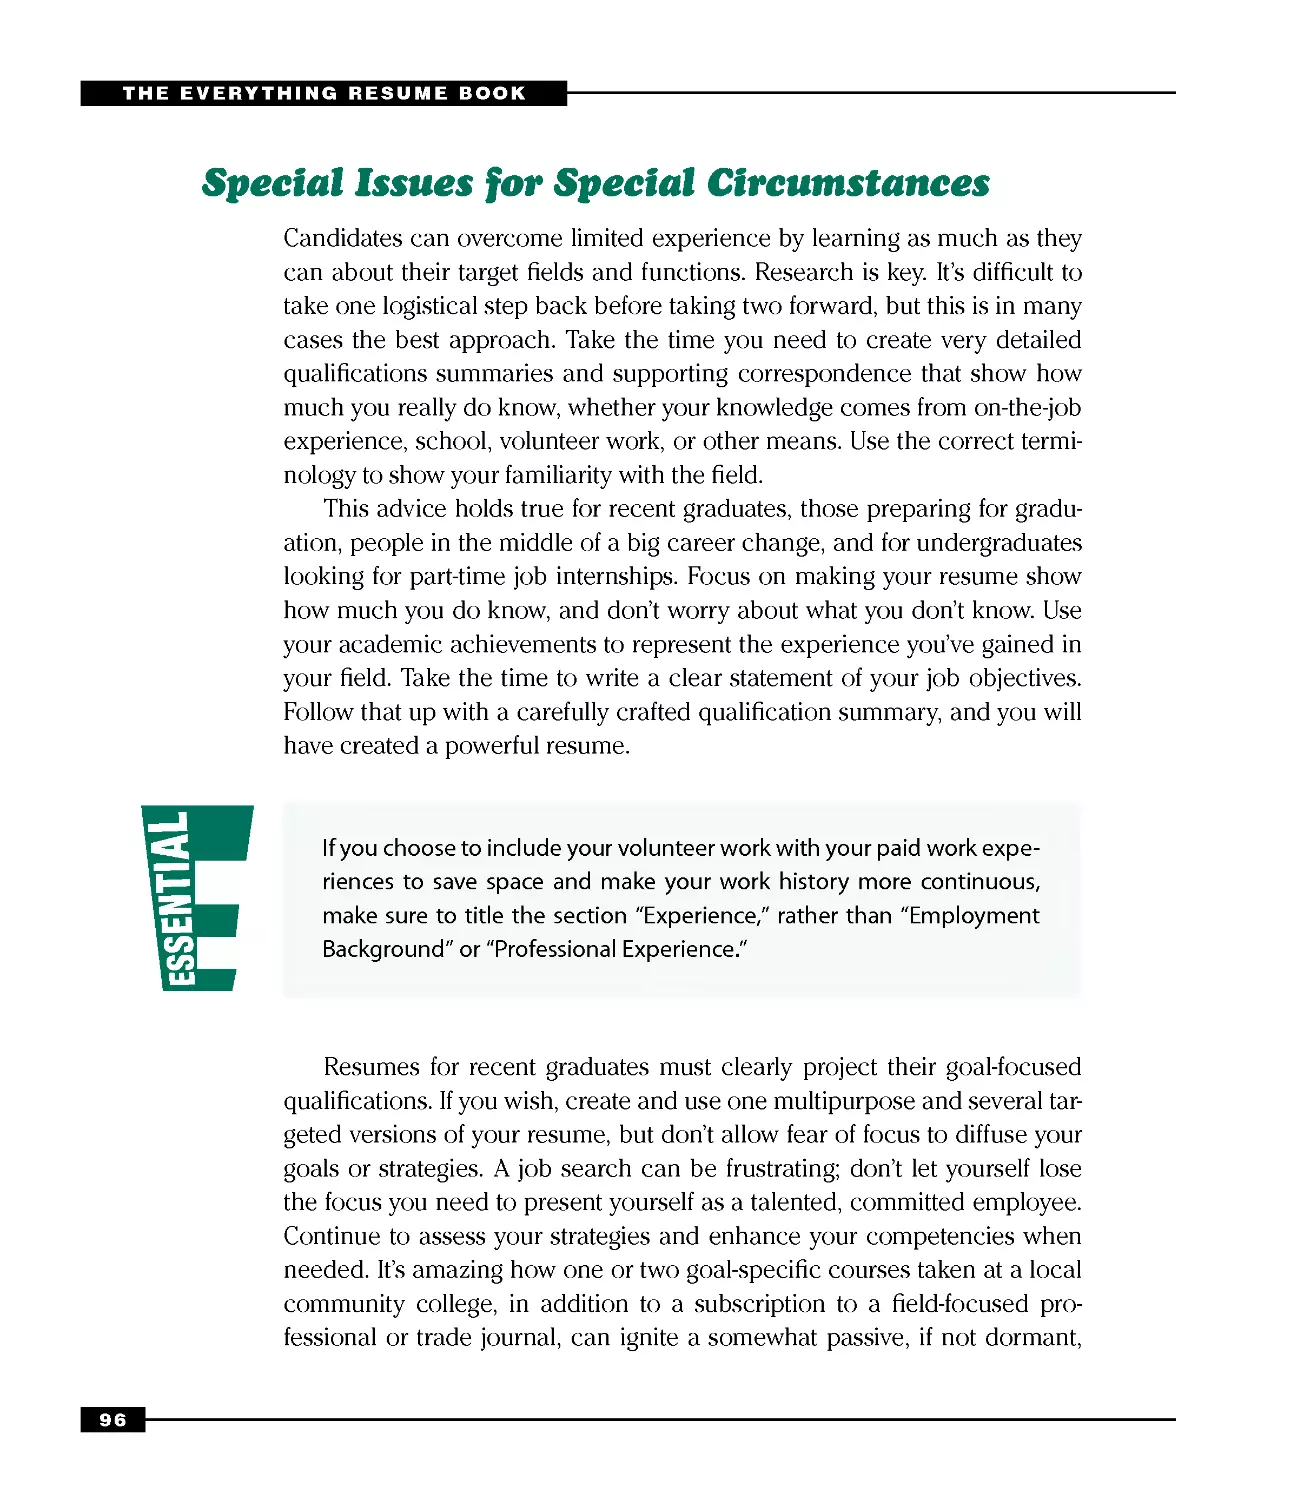 Special Issues for Special Circumstances